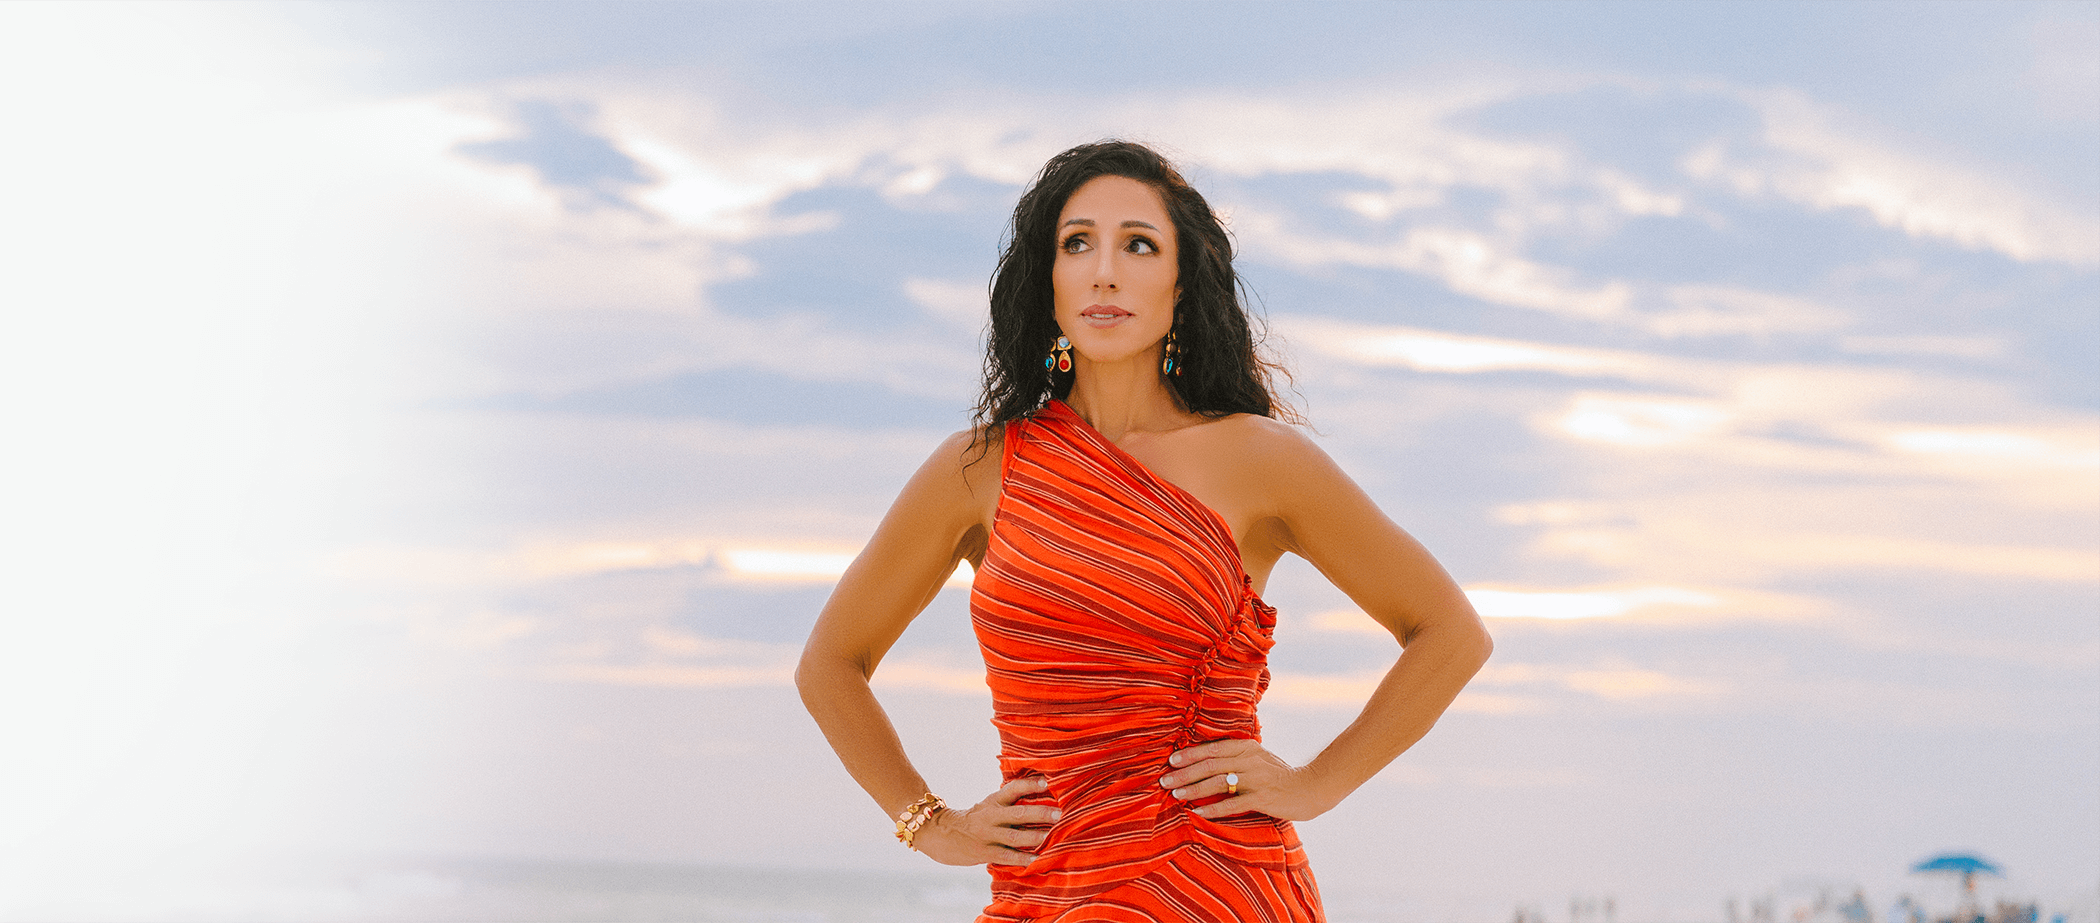 Dr. Michelle in a red dress sitting on the beach